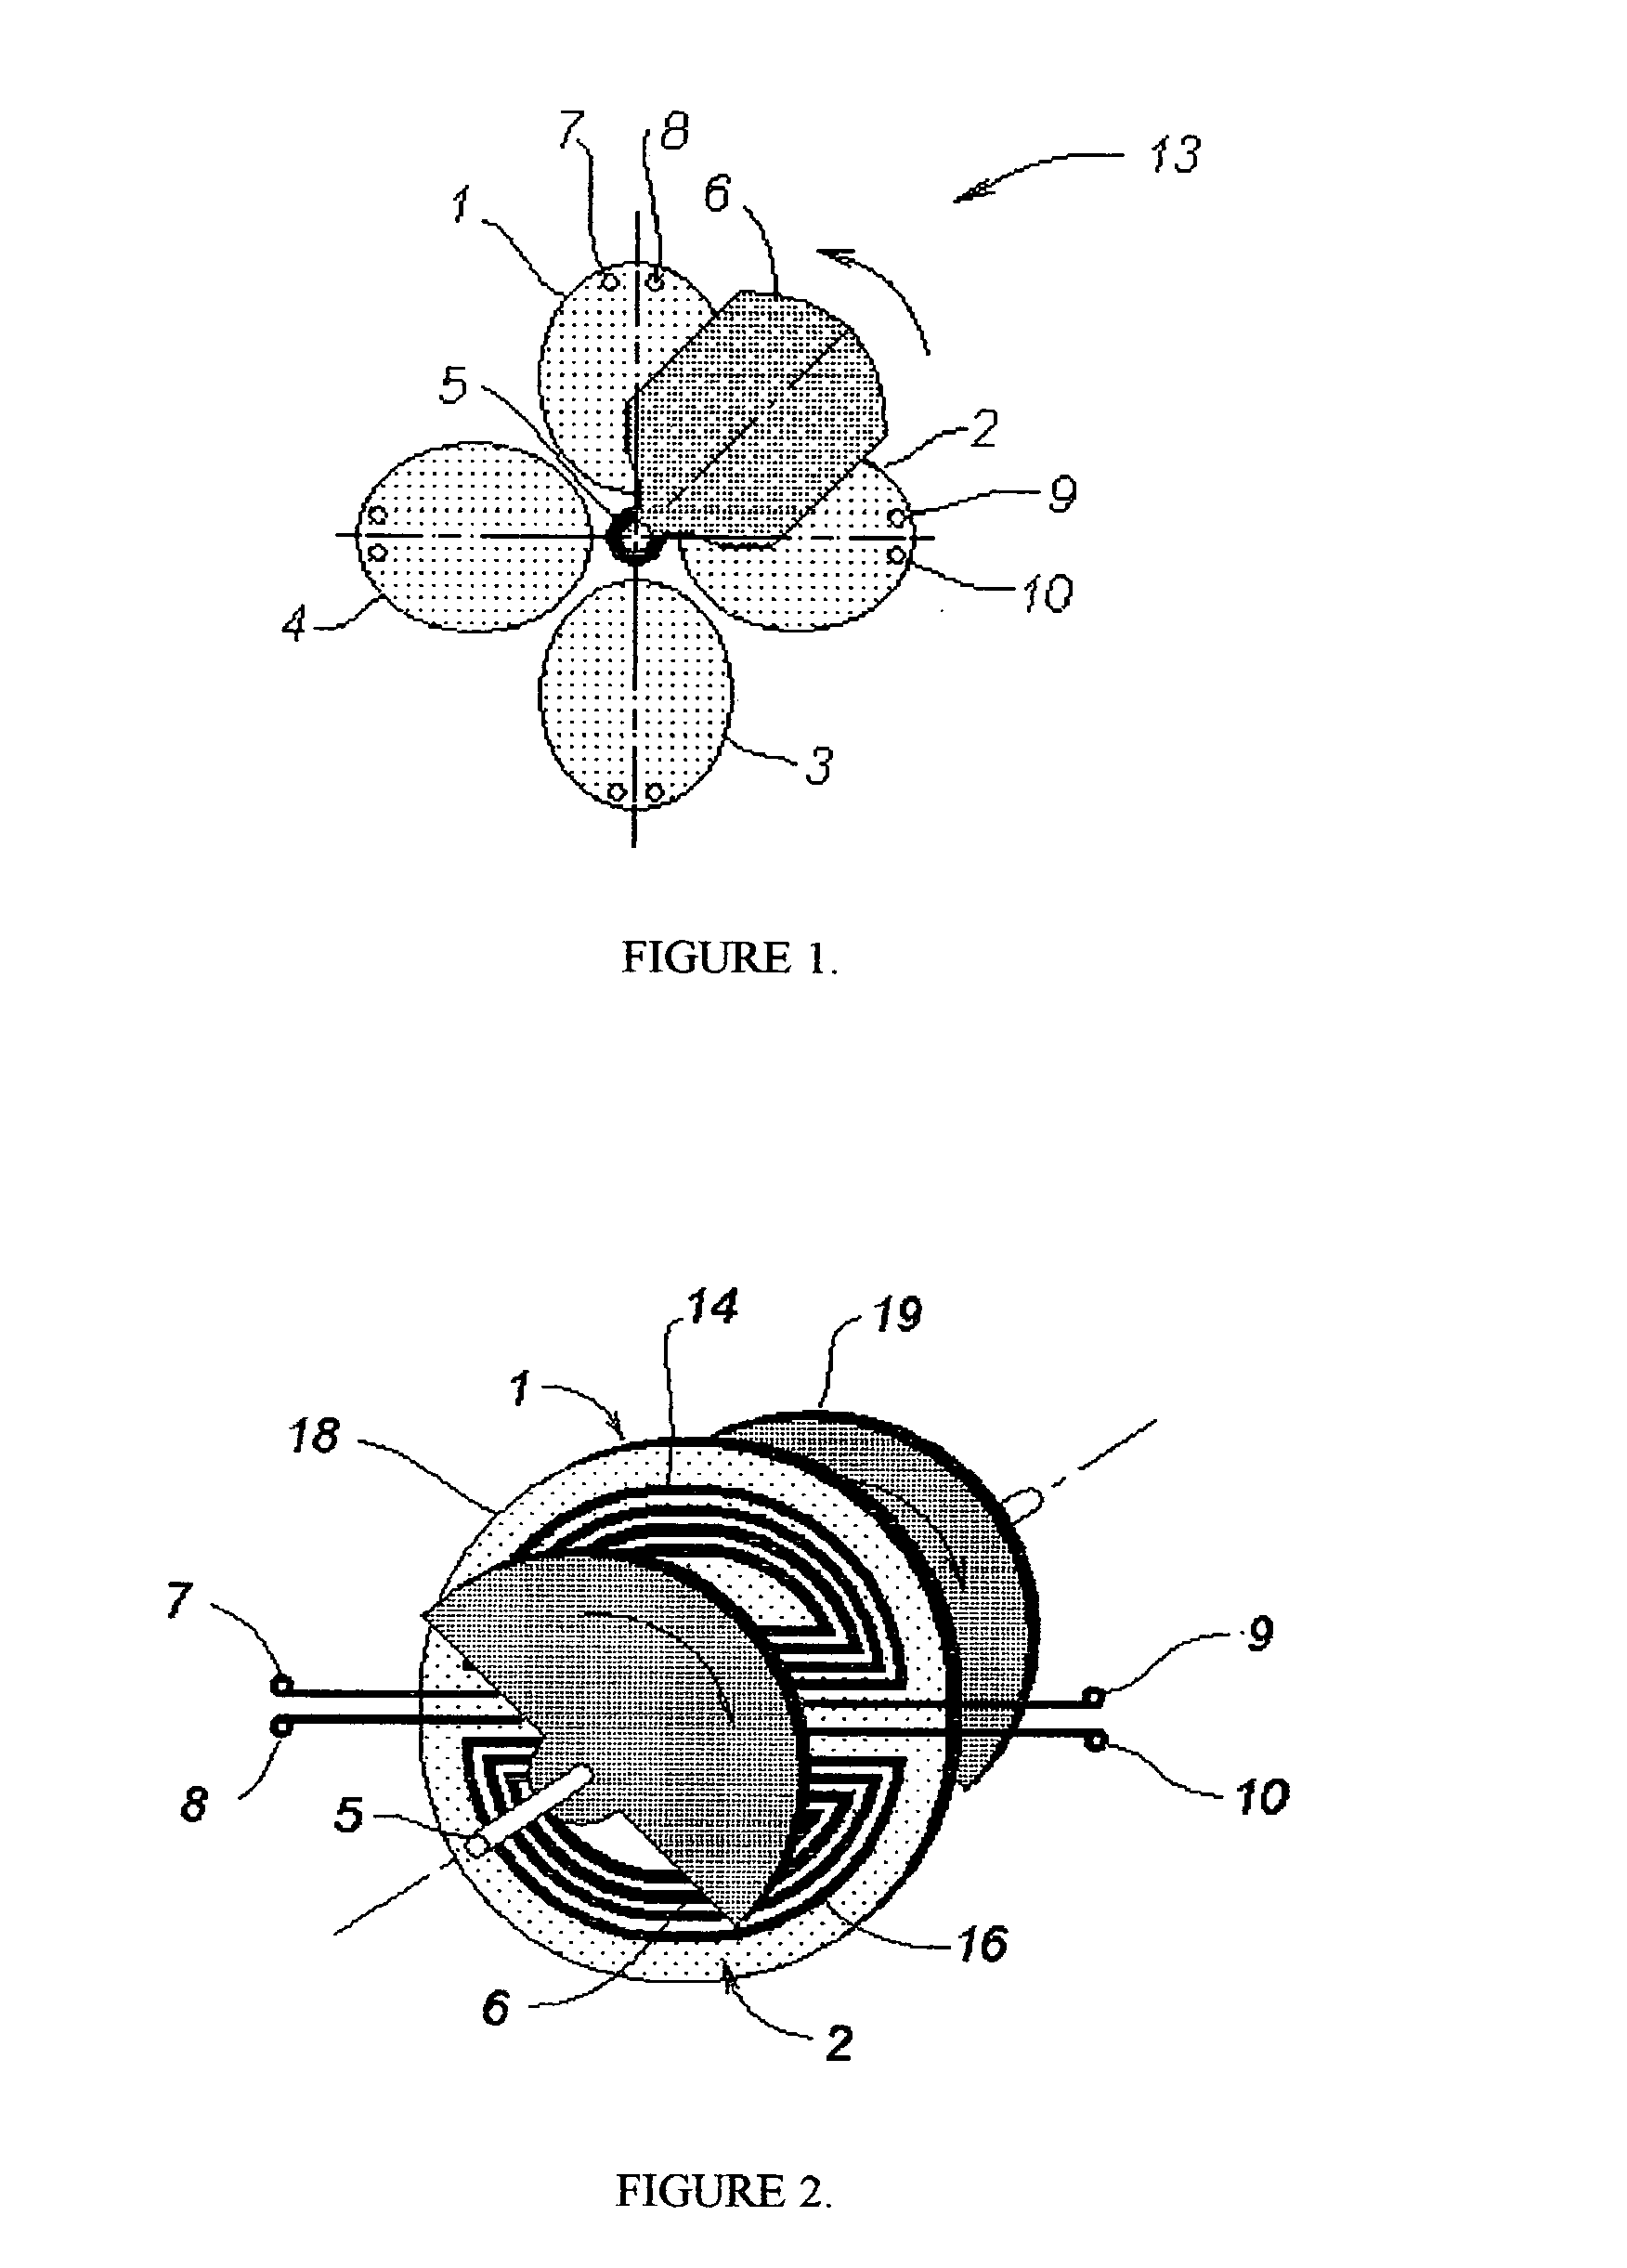 Electromagnetic apparatus for measuring angular position